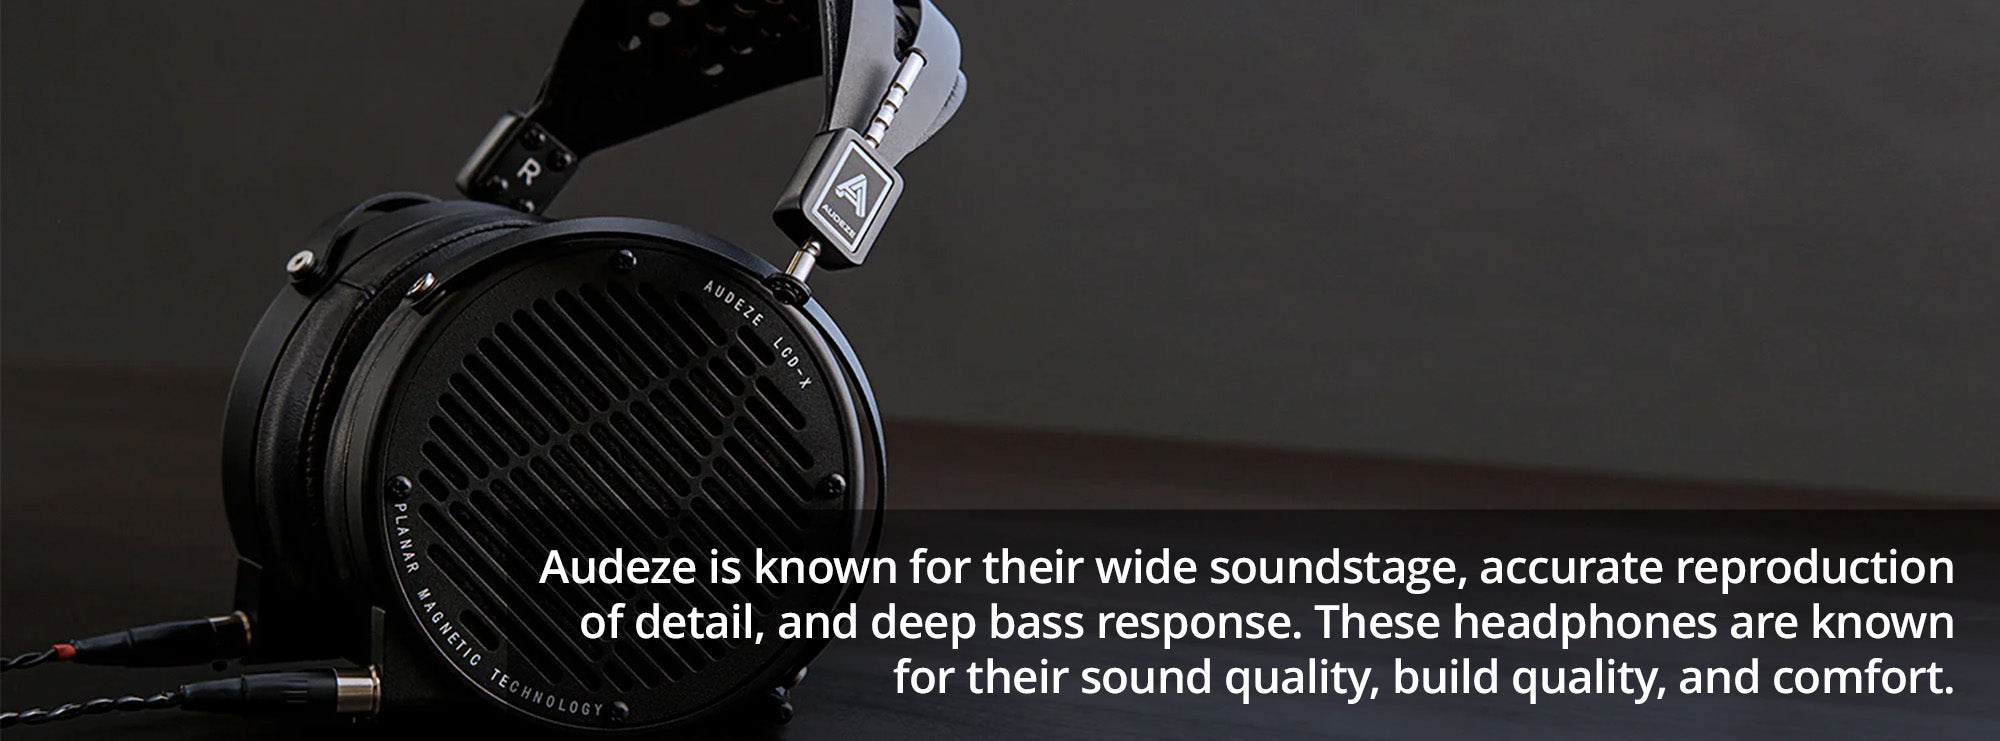 Audeze is known for their wide soundstage, accurate reproduction of detail, and deep bass response. These headphones are known for their sound quality, build quality, and comfort.